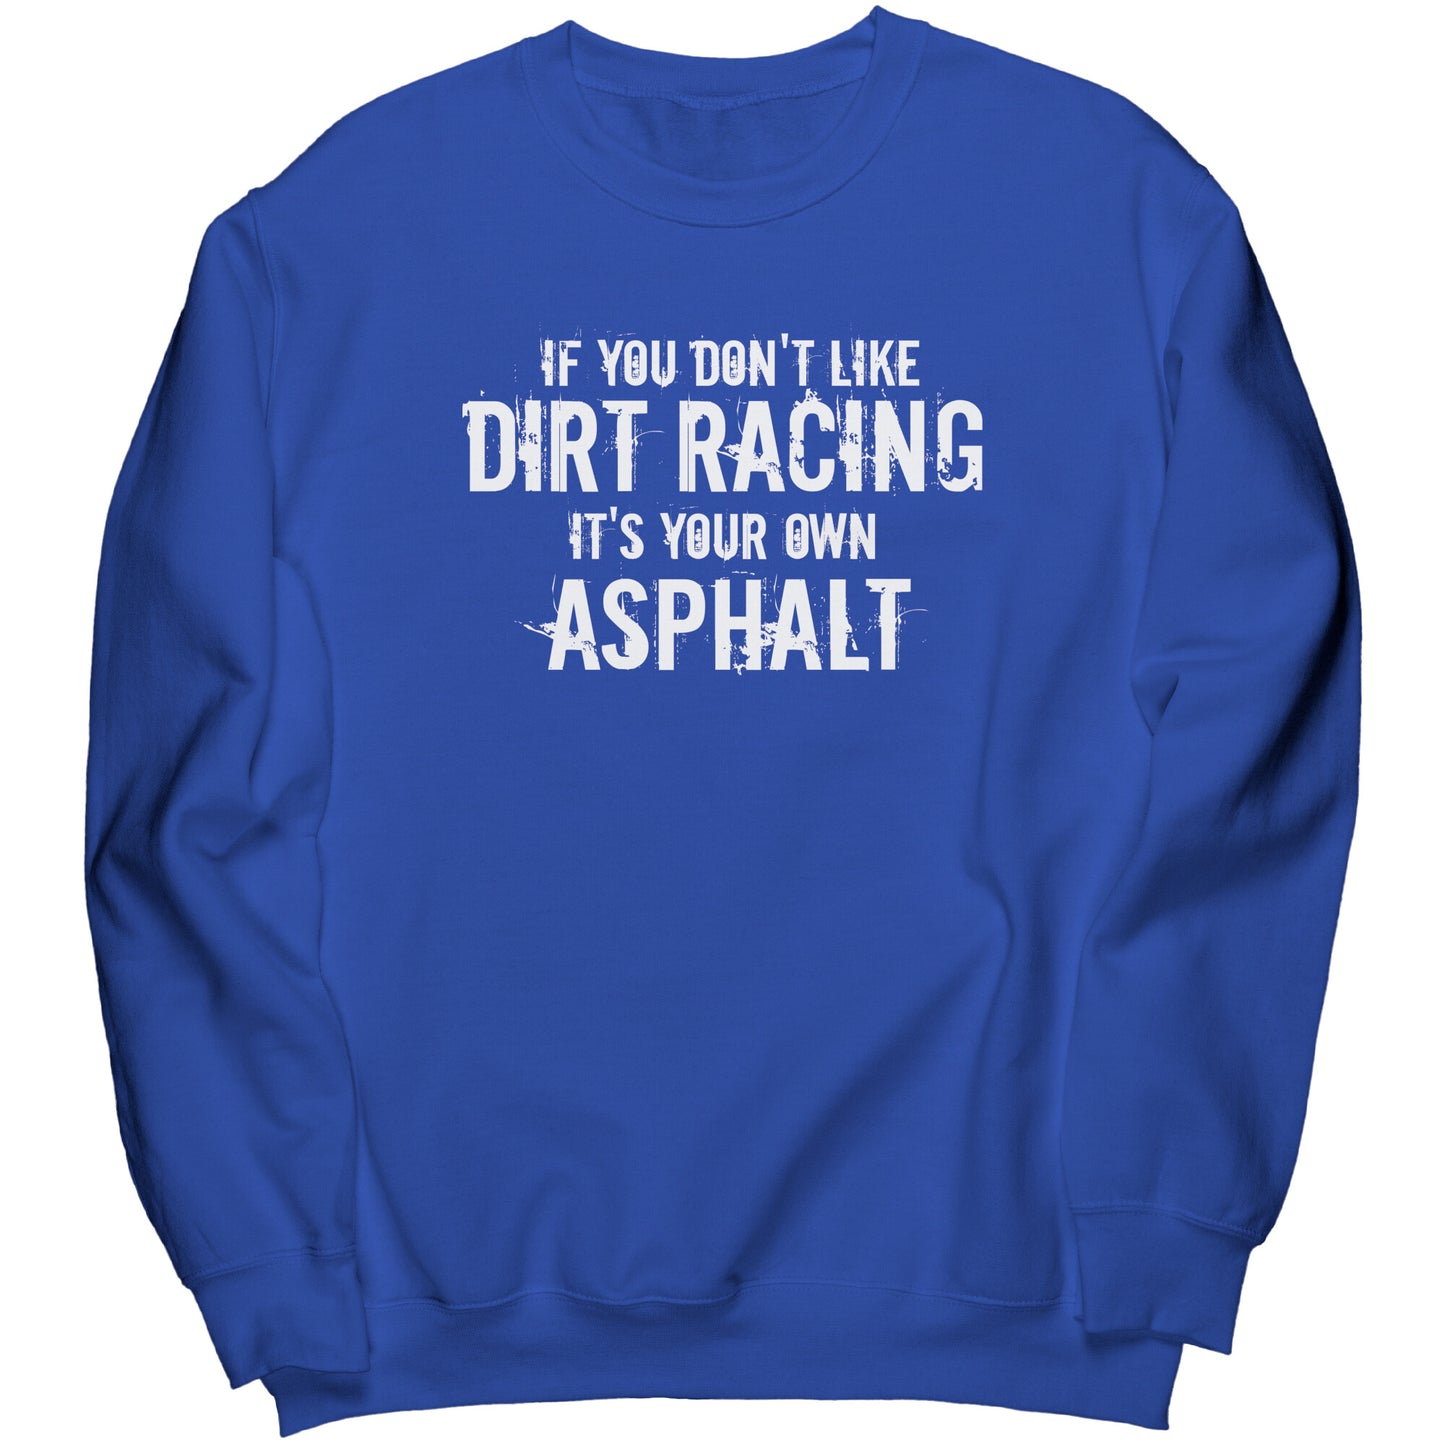 If You Don't Like Dirt Racing It's Your Own Asphalt Sweatshirt